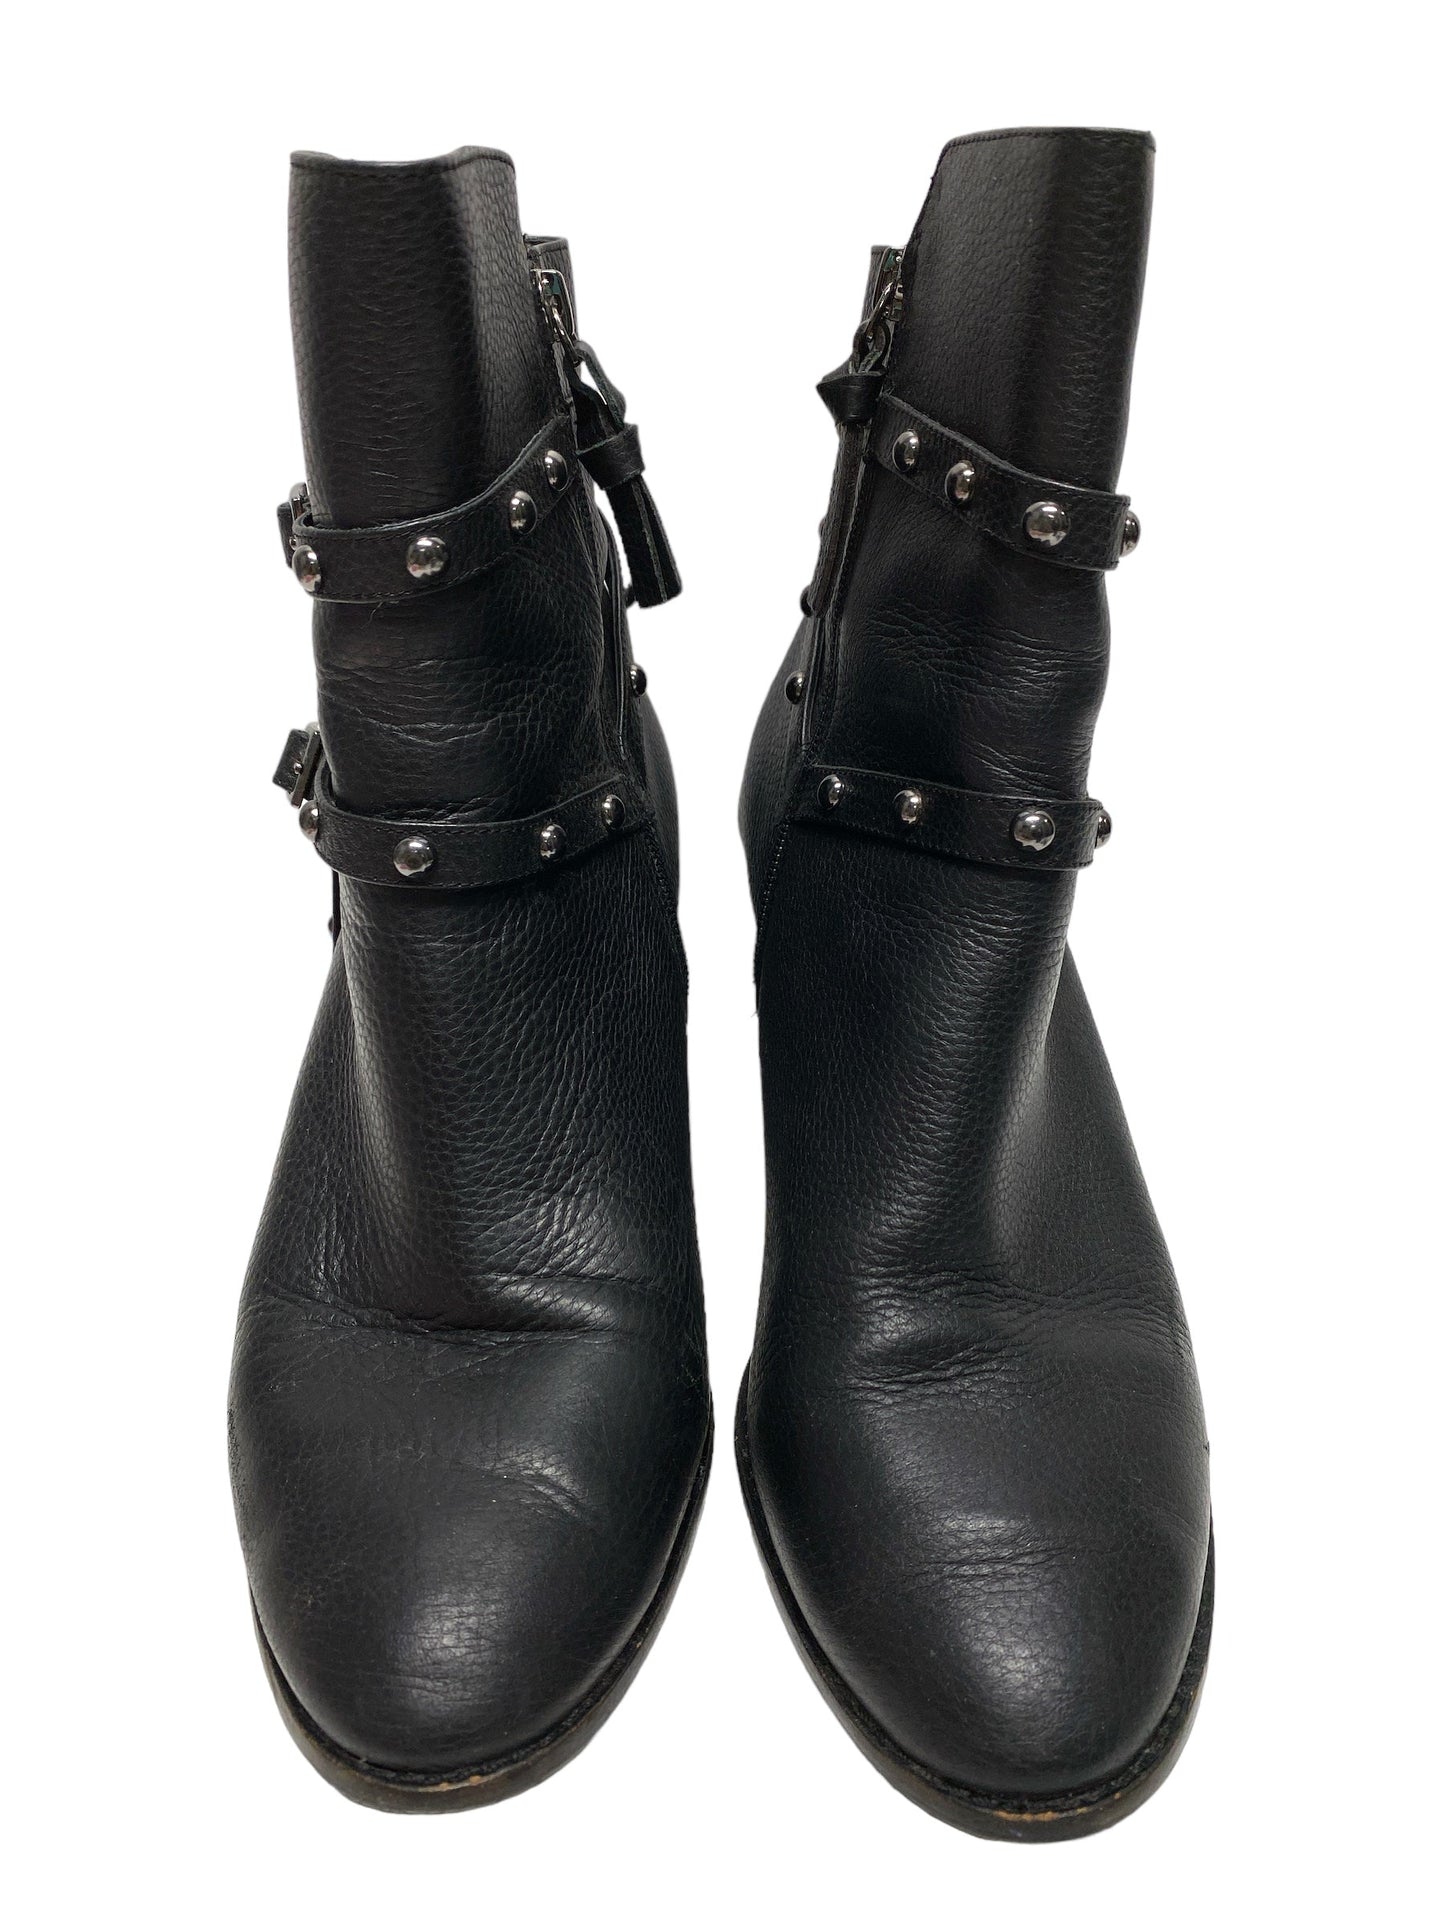 Boots Knee Heels By Saks Fifth Avenue  Size: 9.5